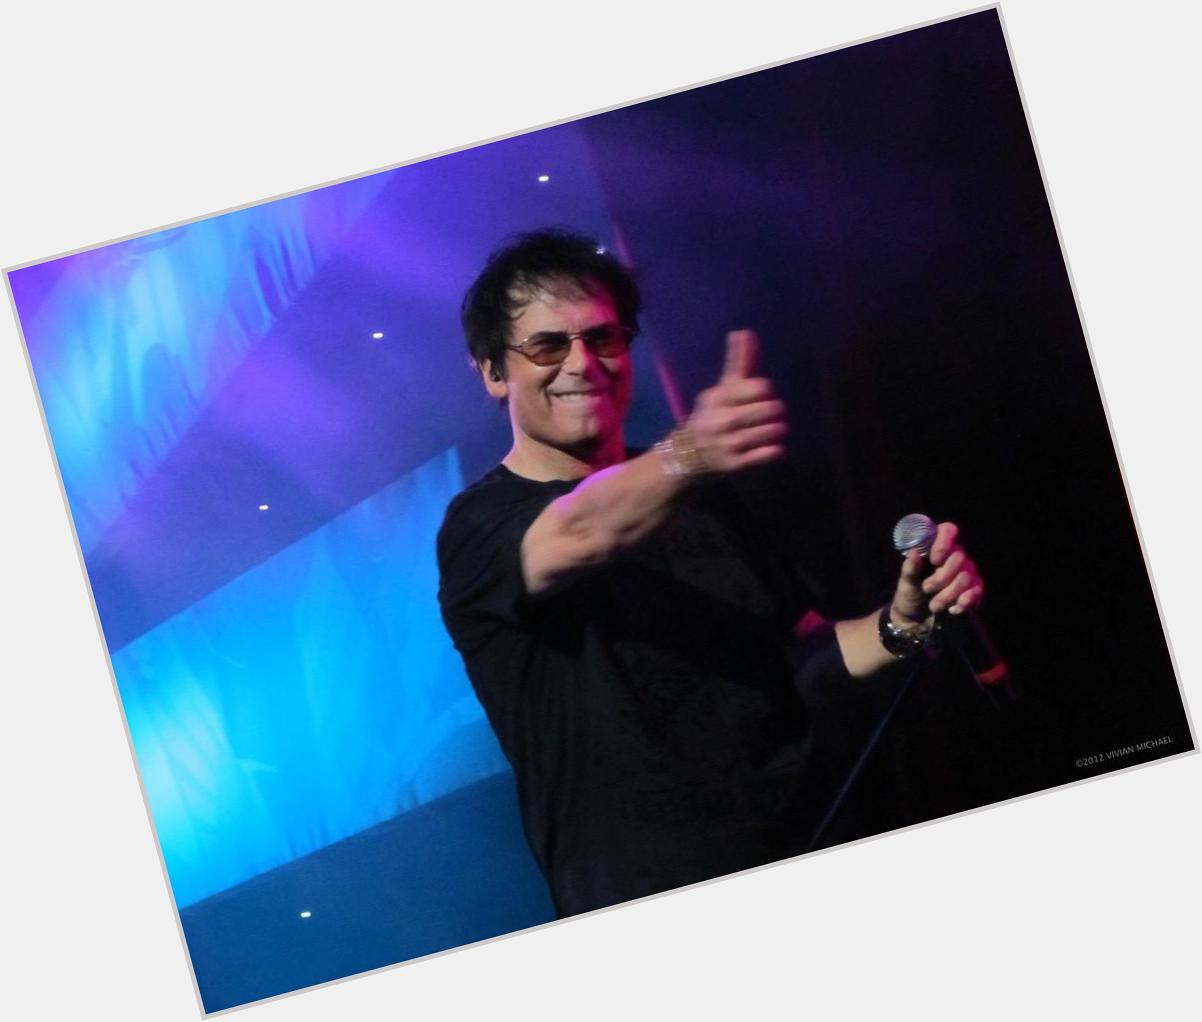 Happy Birthday to an incredible human being and artist, Jimi Jamison! 